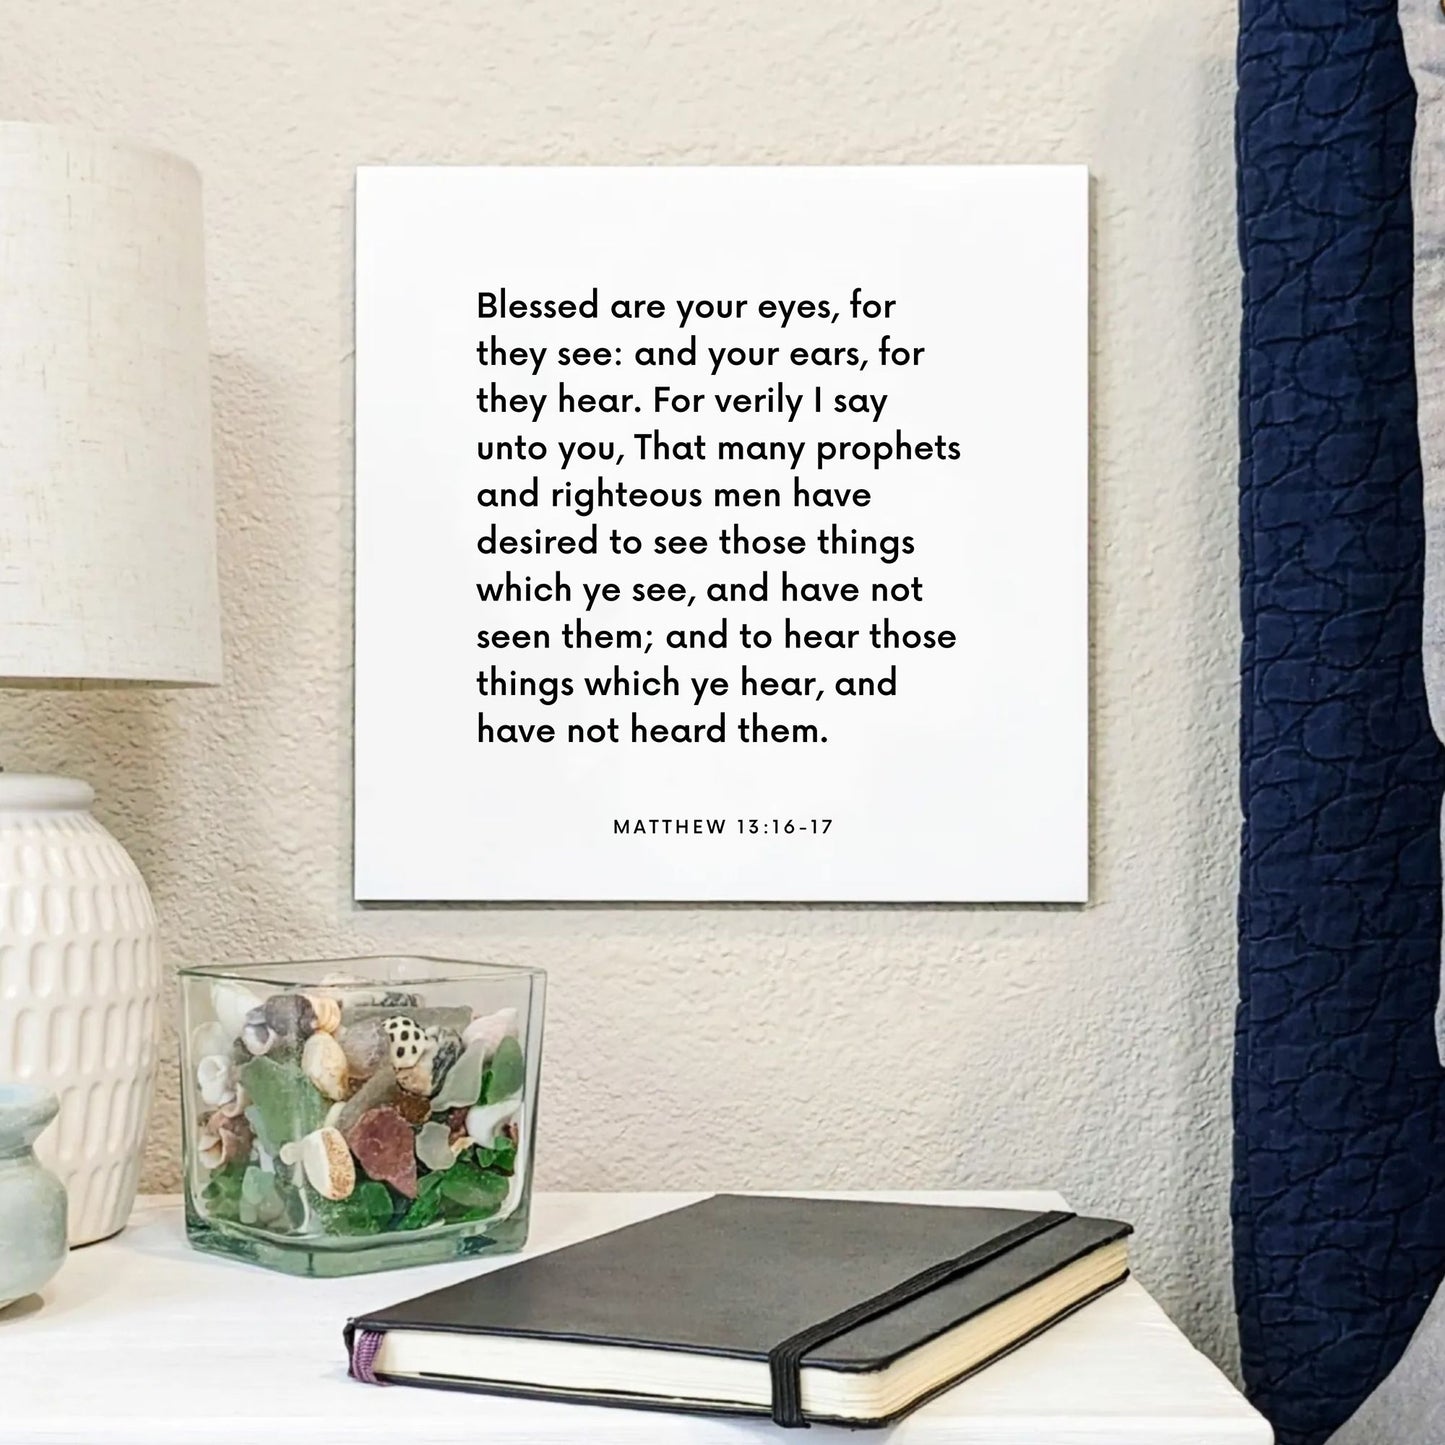 Bedside mouting of the scripture tile for Matthew 13:16-17 - "Blessed are your eyes, for they see"